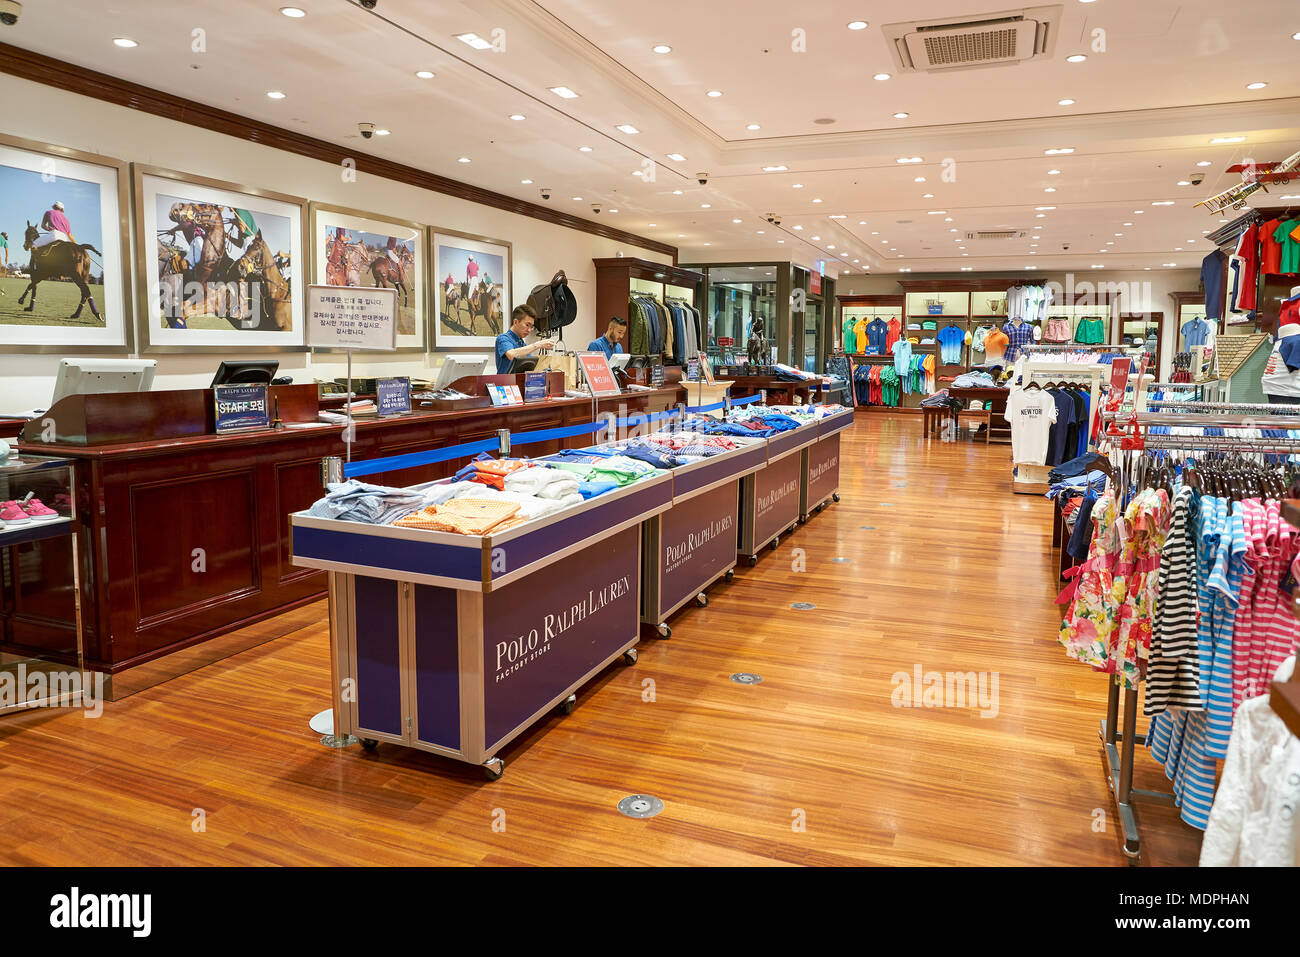 BUSAN, SOUTH KOREA - MAY 25, 2017: inside a Polo Ralph Lauren store at  Lotte Mall in Busan Stock Photo - Alamy